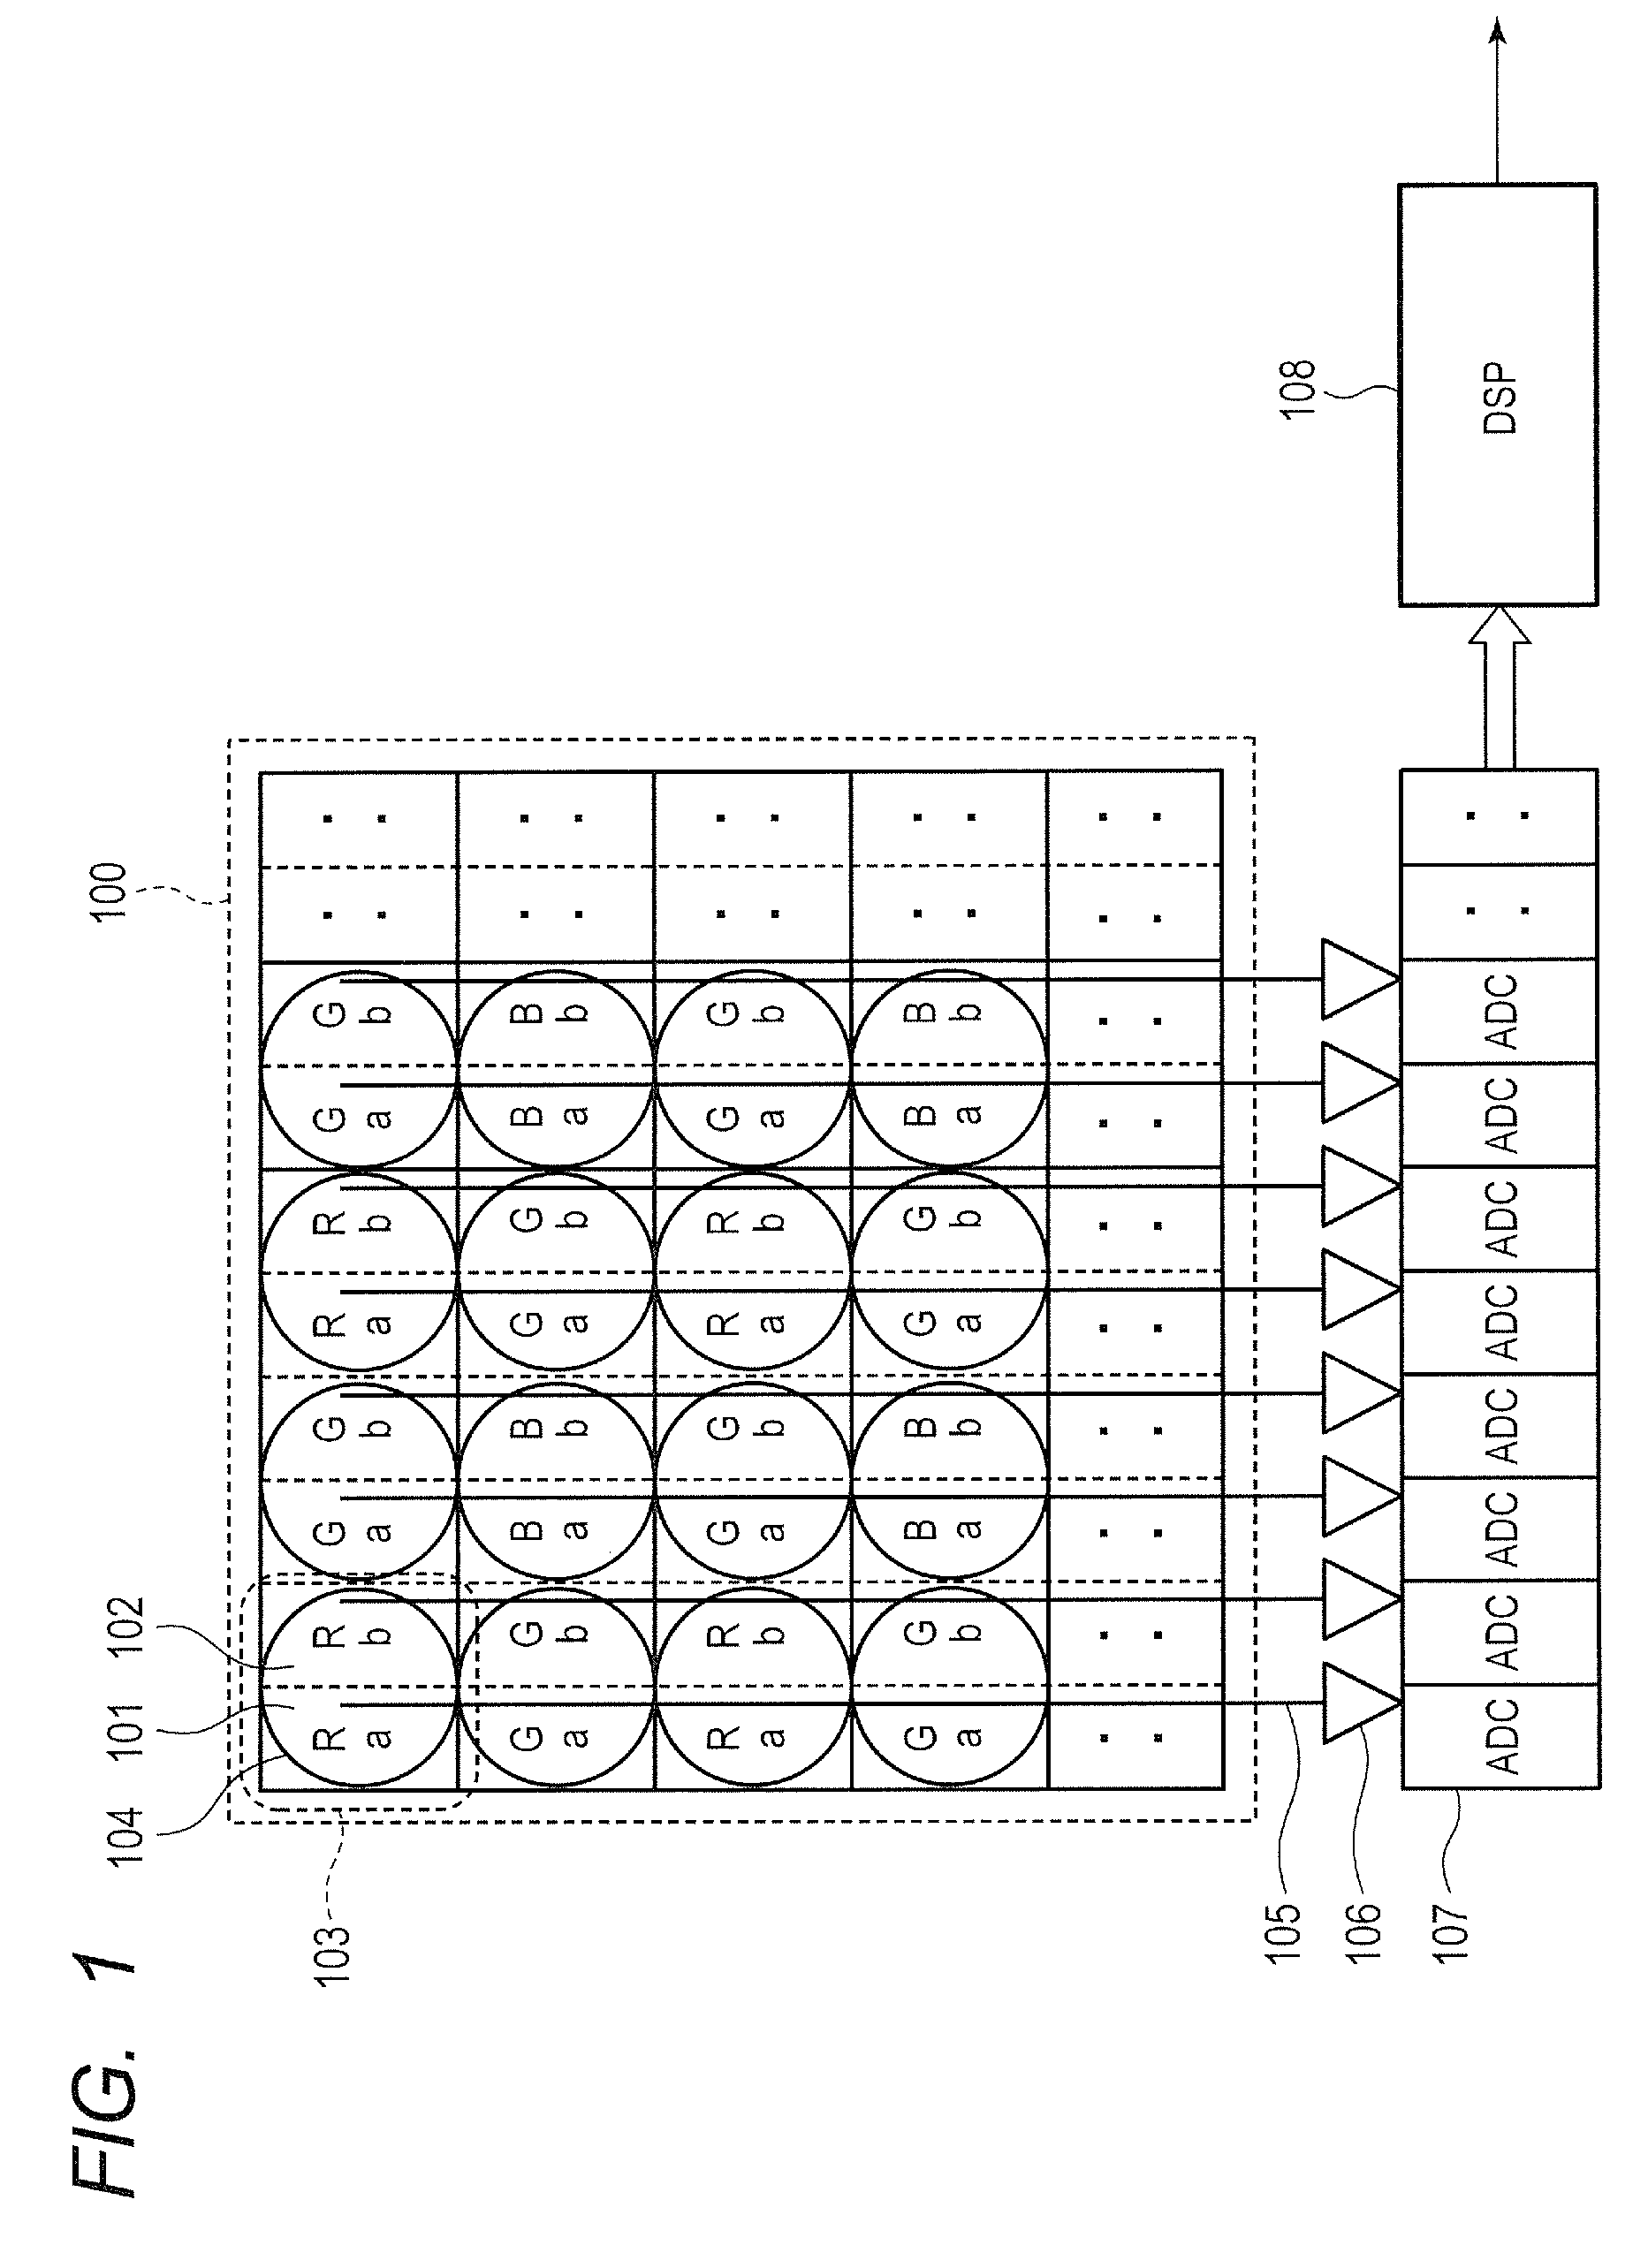 Solid-state imaging device, imaging system, and signal processing method